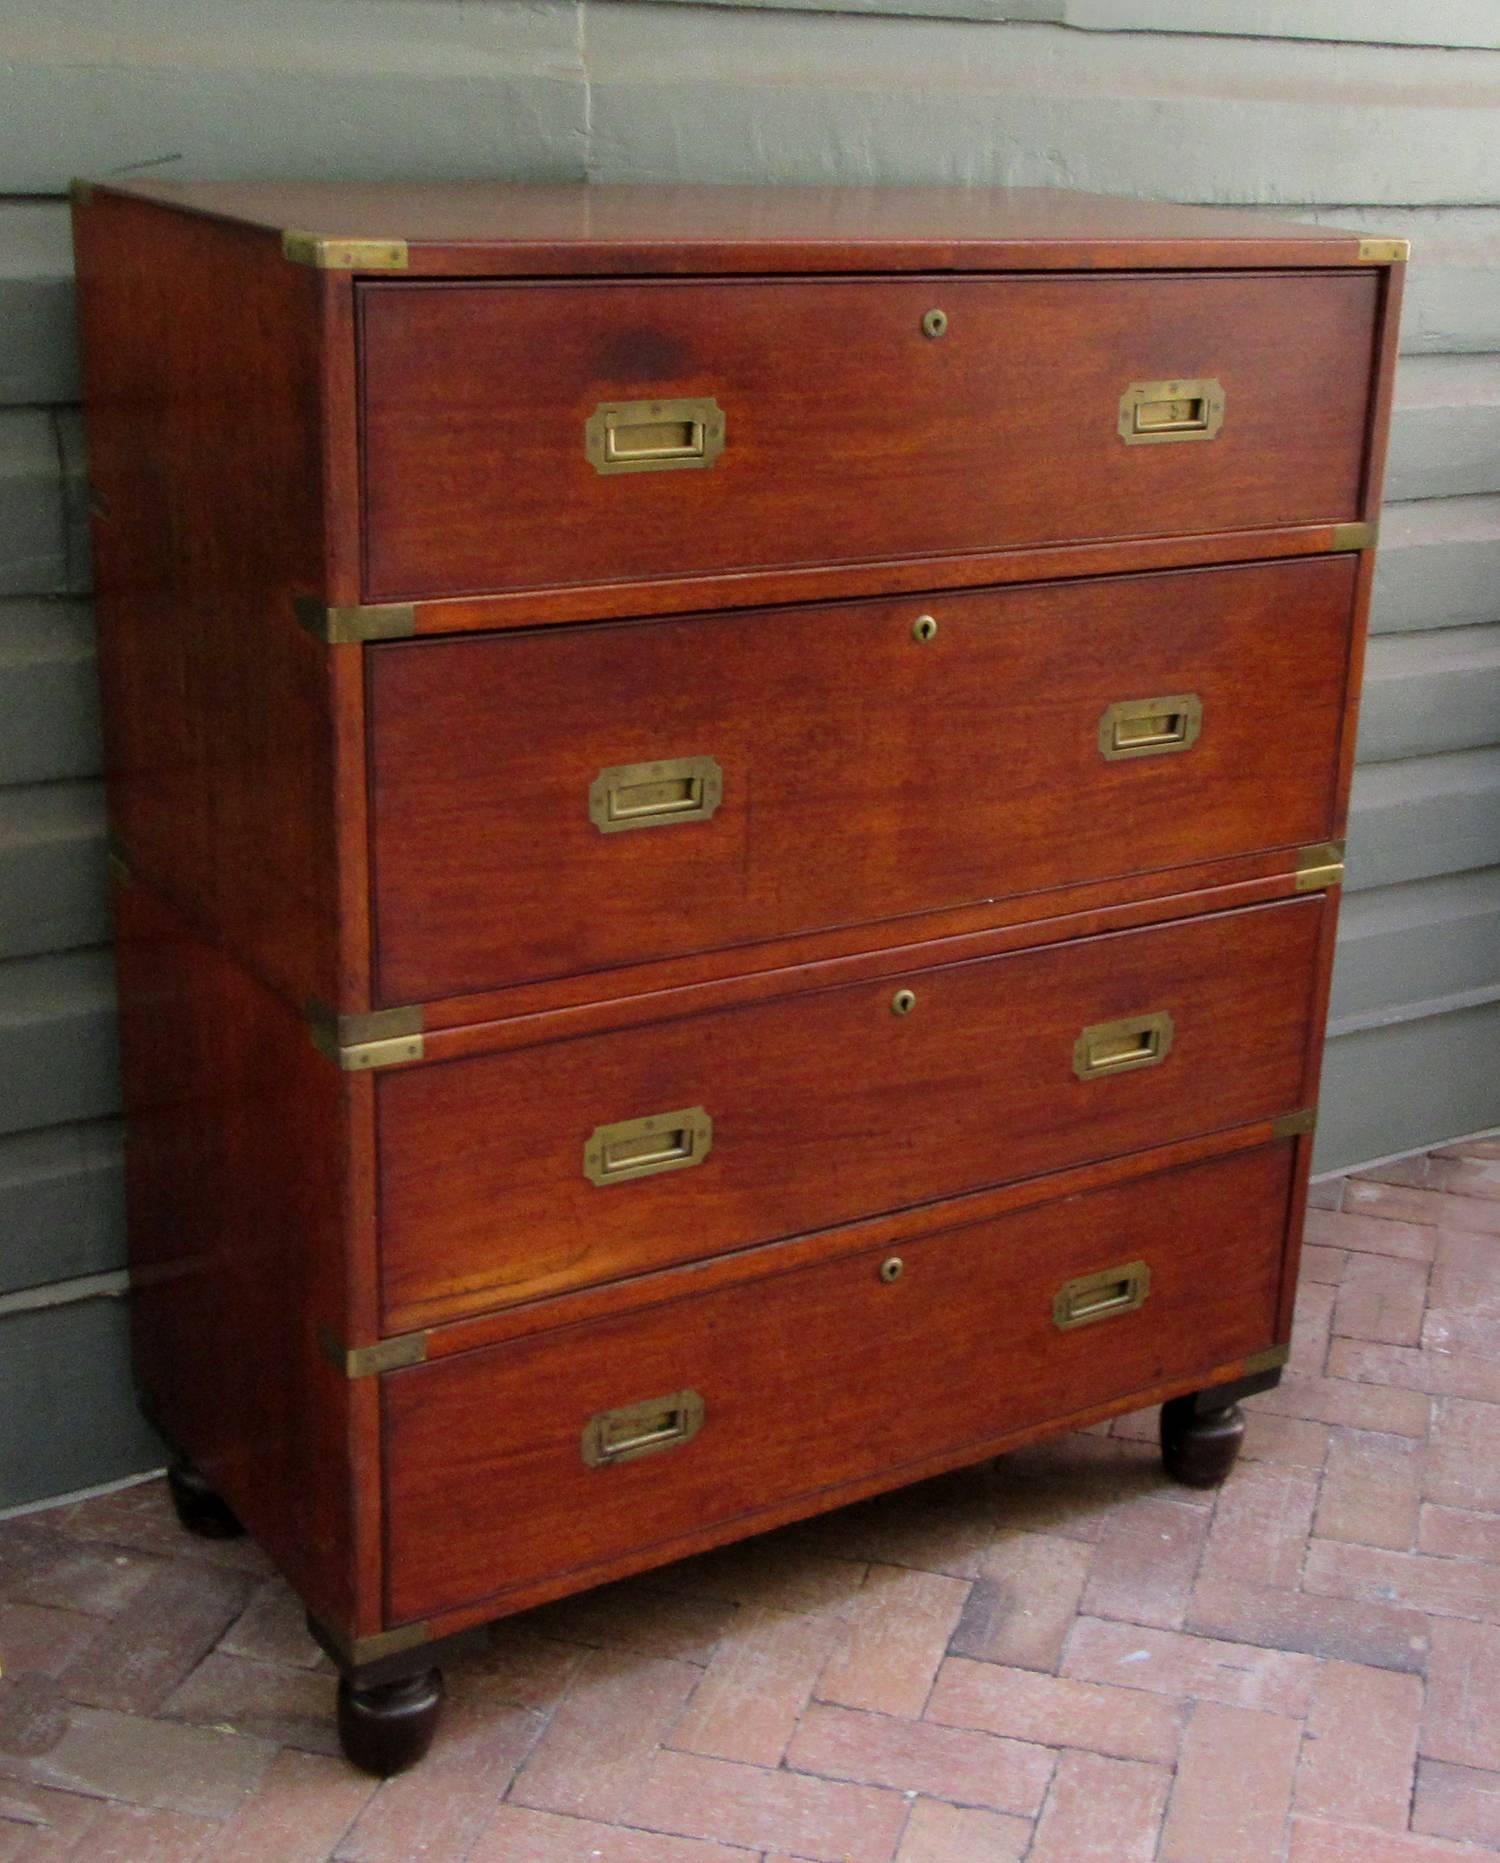 A mahogany English Campaign butler's desk, circa 1820, featuring two drawers with embossed black leather desktop and original turned bun feet.